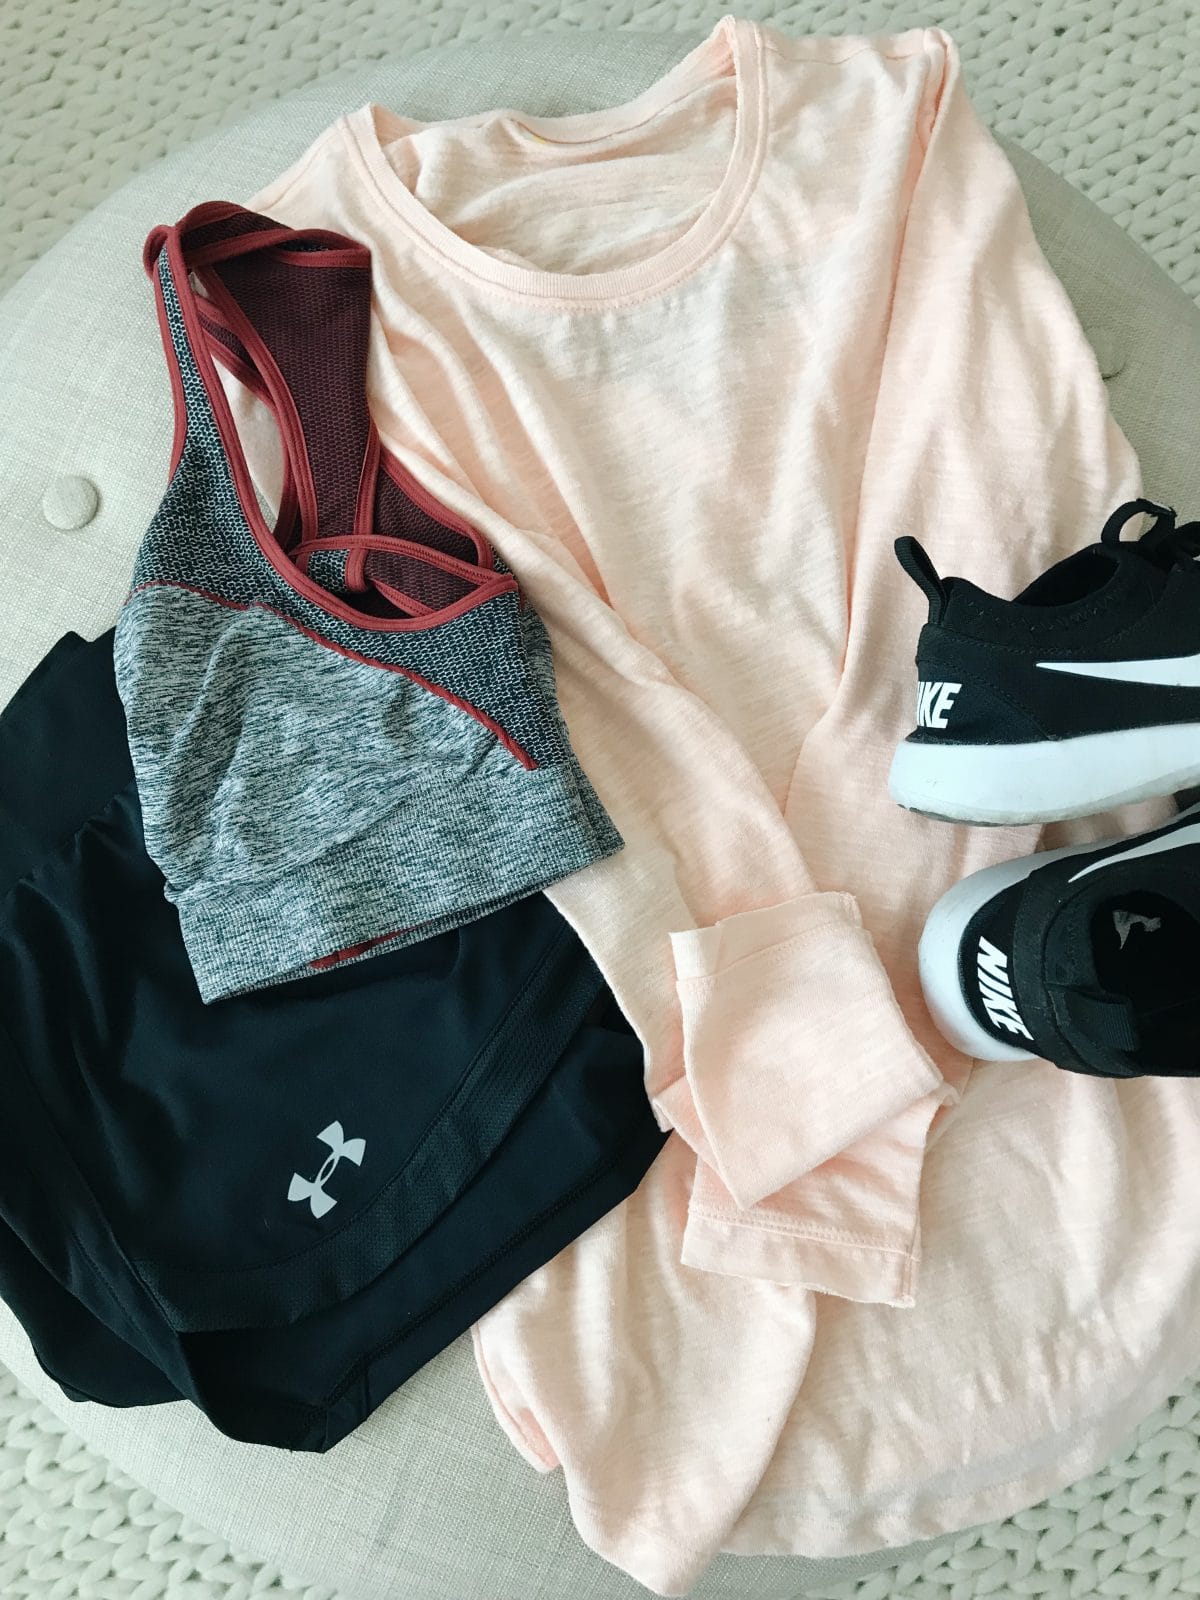 Fitness outfit